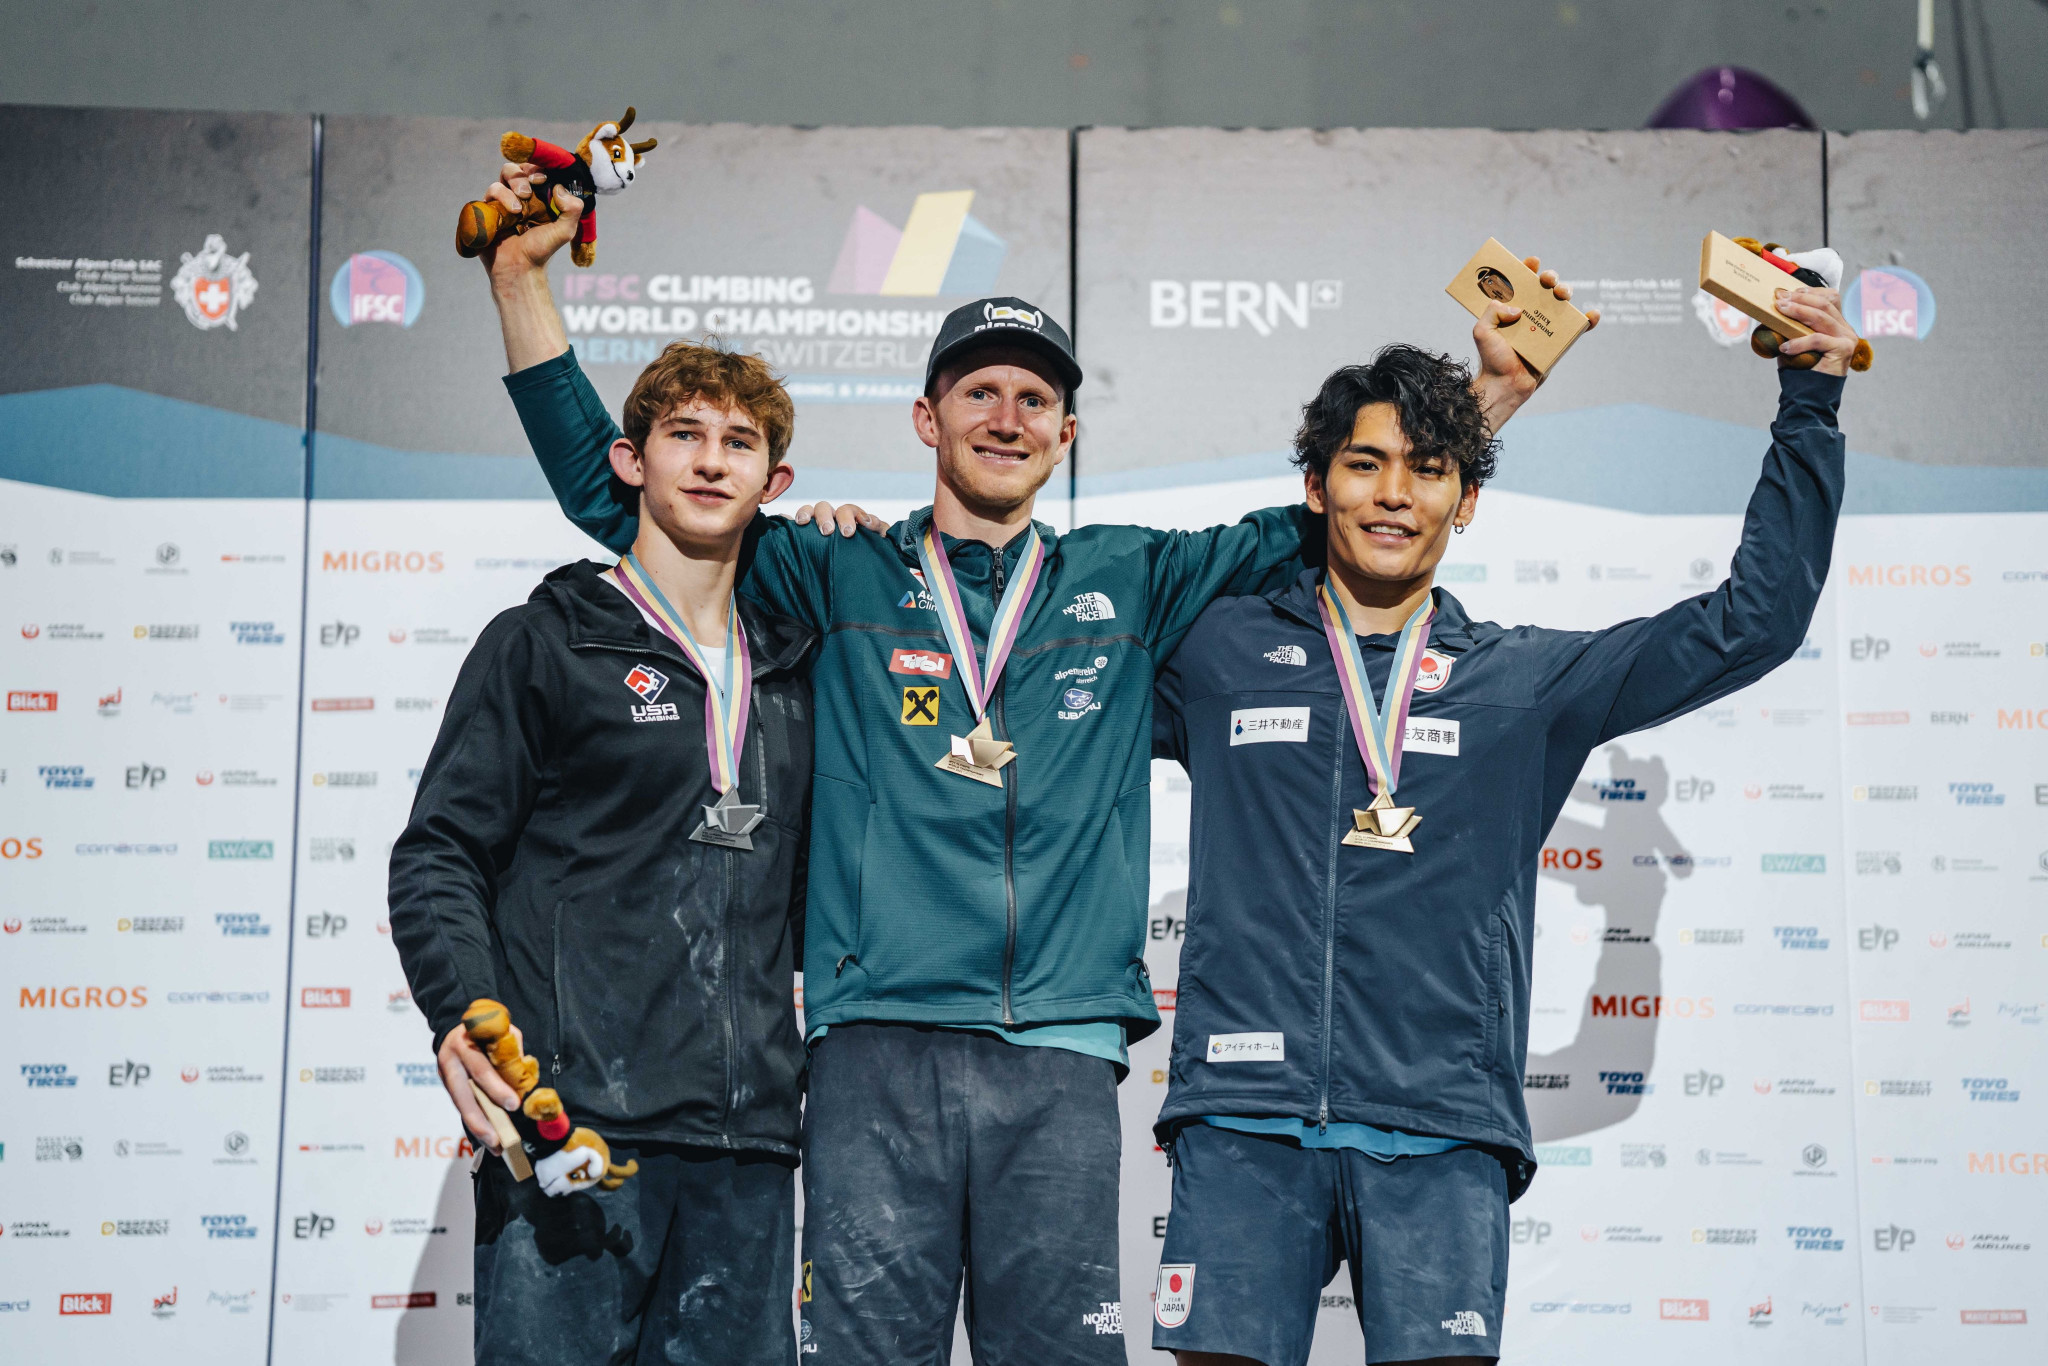 Schubert clinches Paris 2024 place with Climbing World Championships gold